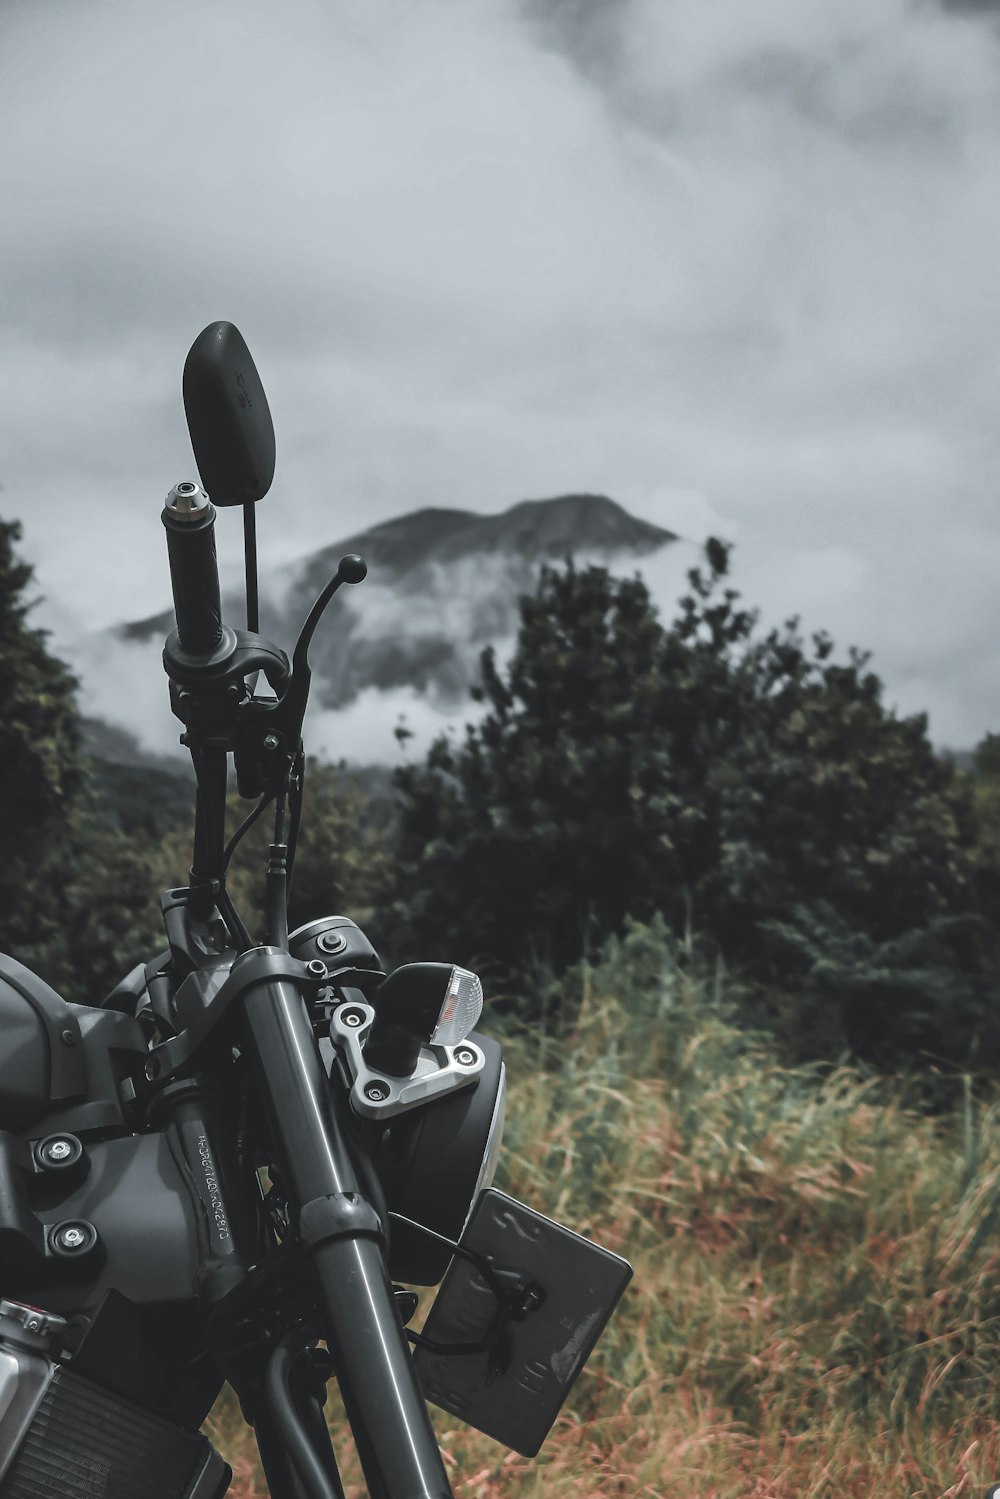 a motorcycle parked in a field with mountains in the background